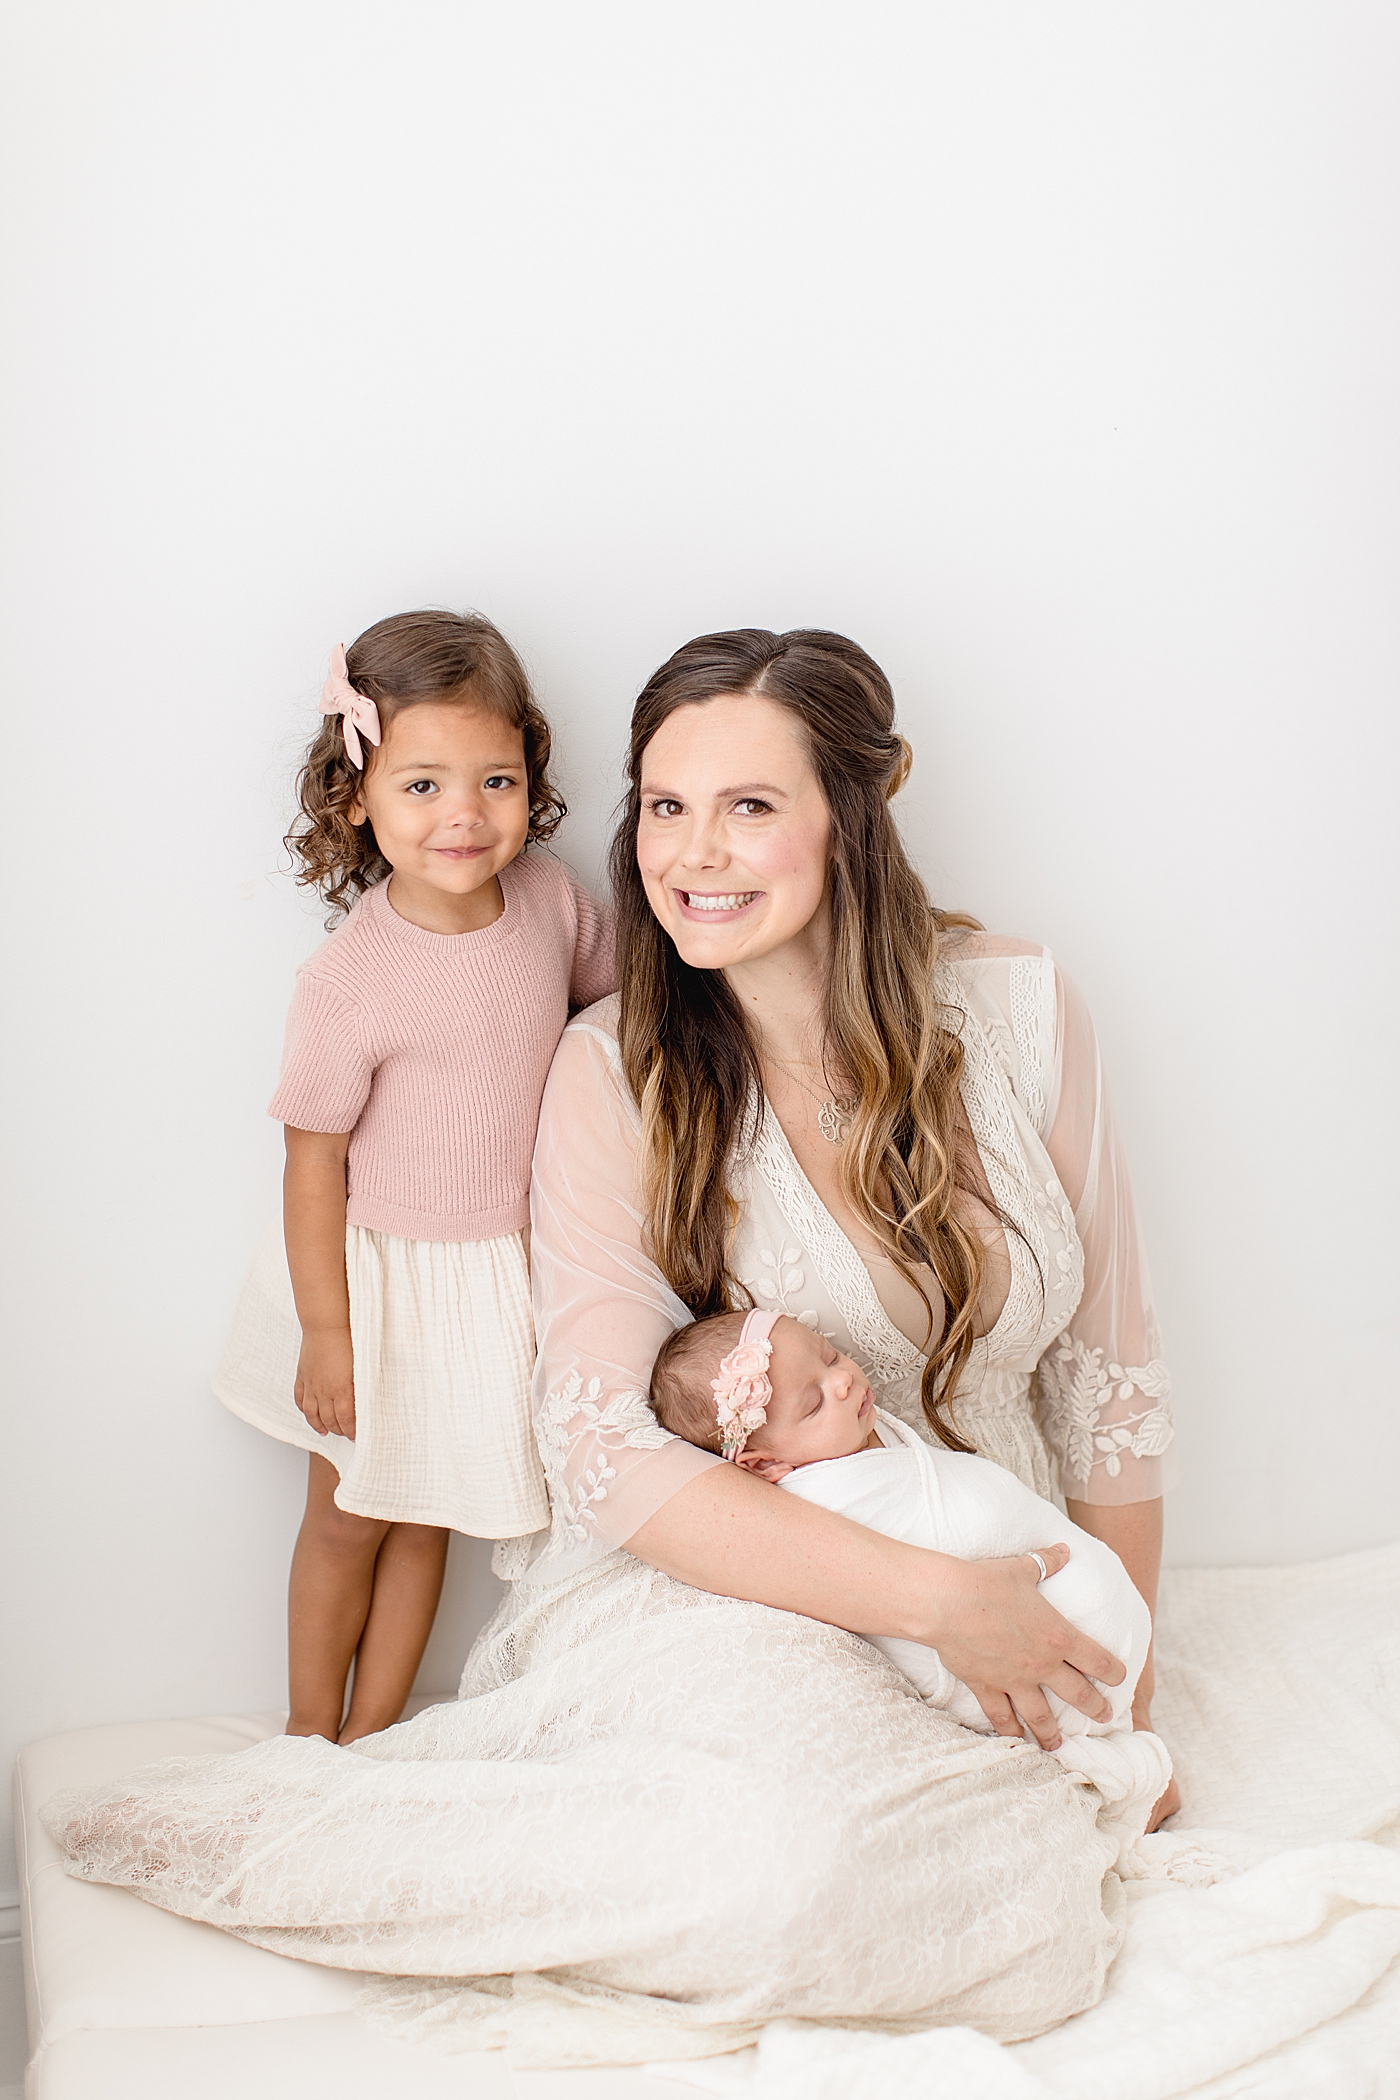 Mom with her two girls. Photo by Brittany Elise Photography.